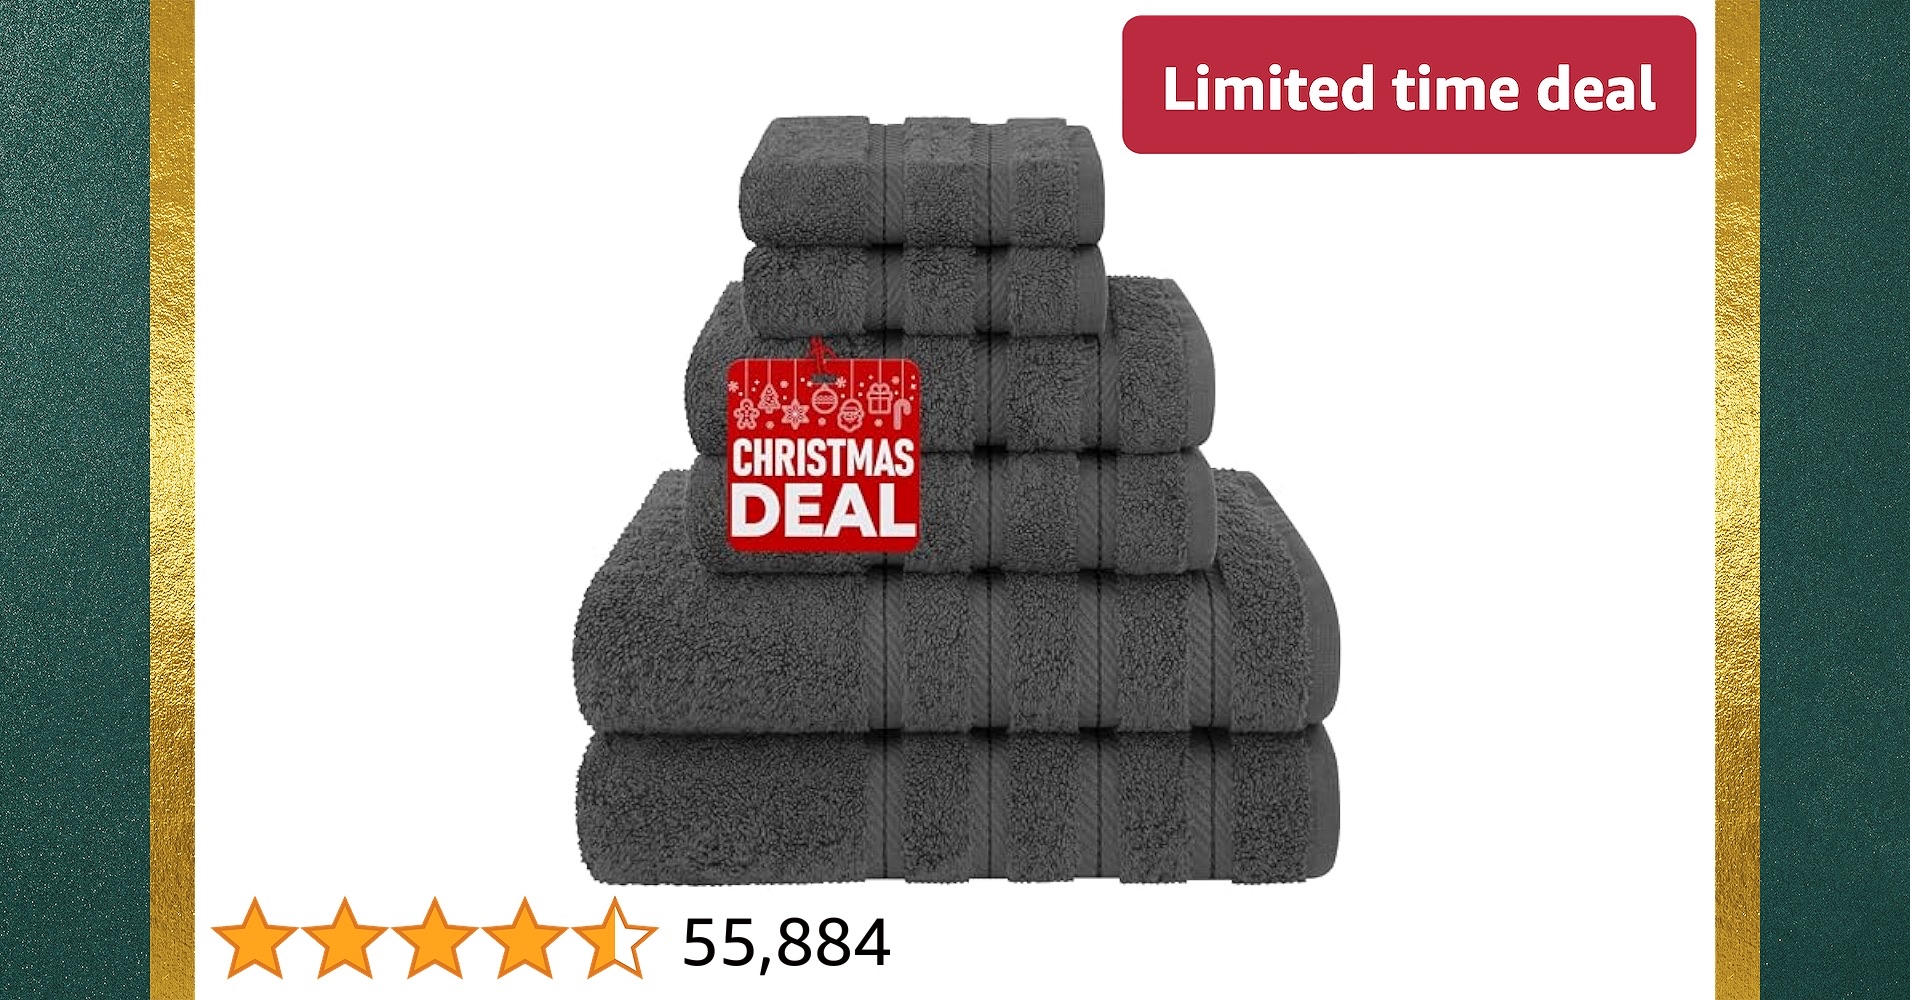 Limited-time deal: American Soft Linen Luxury 6 Piece Towel Set, 2 Bath Towels 2 Hand Towels 2 Washcloths, 100% Turkish Cotton Towels for Bathroom, Gray Towel Sets